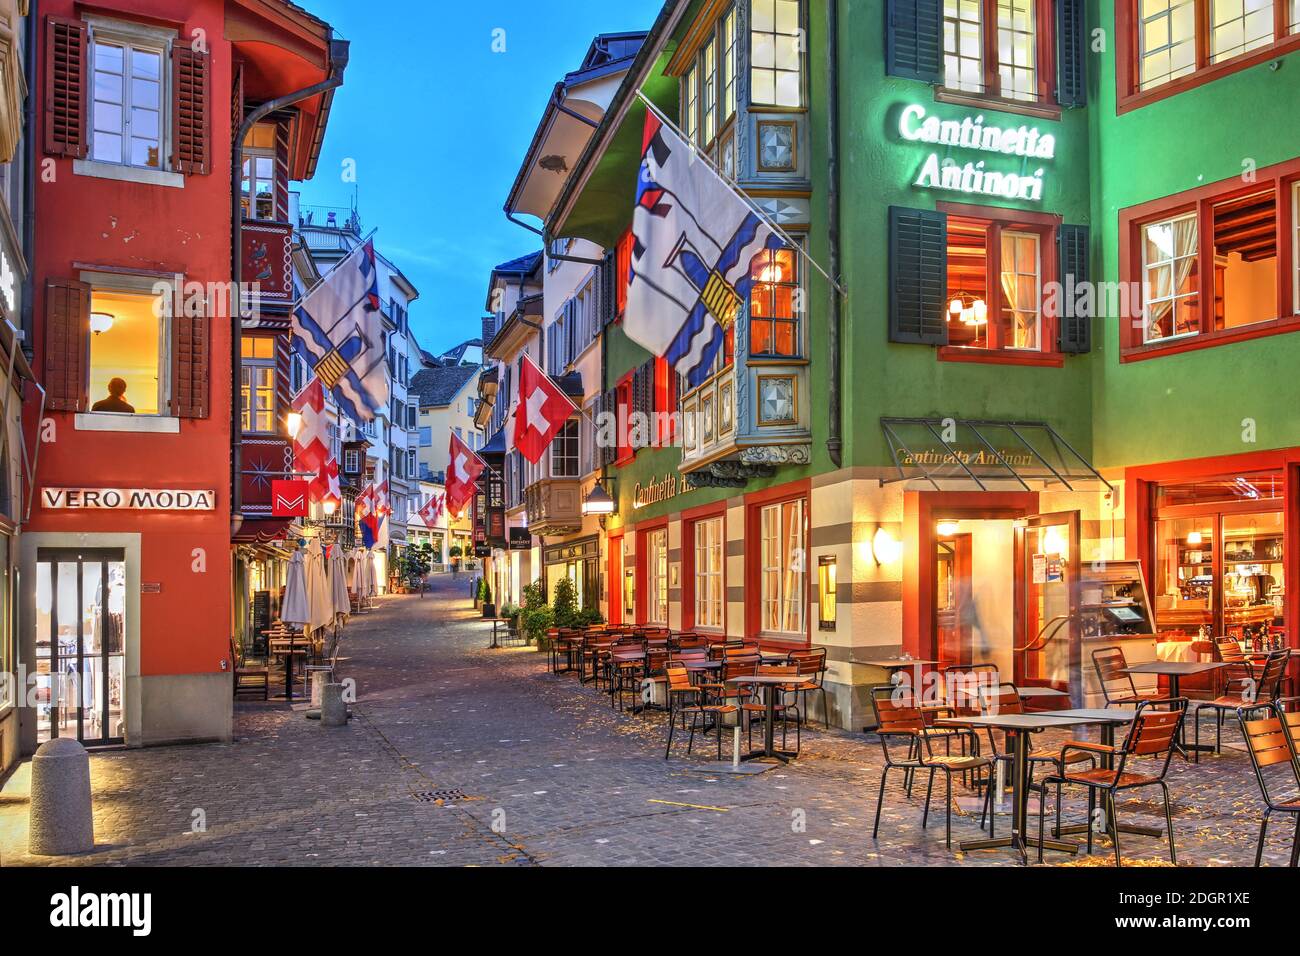 Zurich, Switzerland - June 26, 2020 - Evening scene in Zurich, Switzerland along the pitoresque Augustinergasse, shortly after the Covid-19 opening of Stock Photo